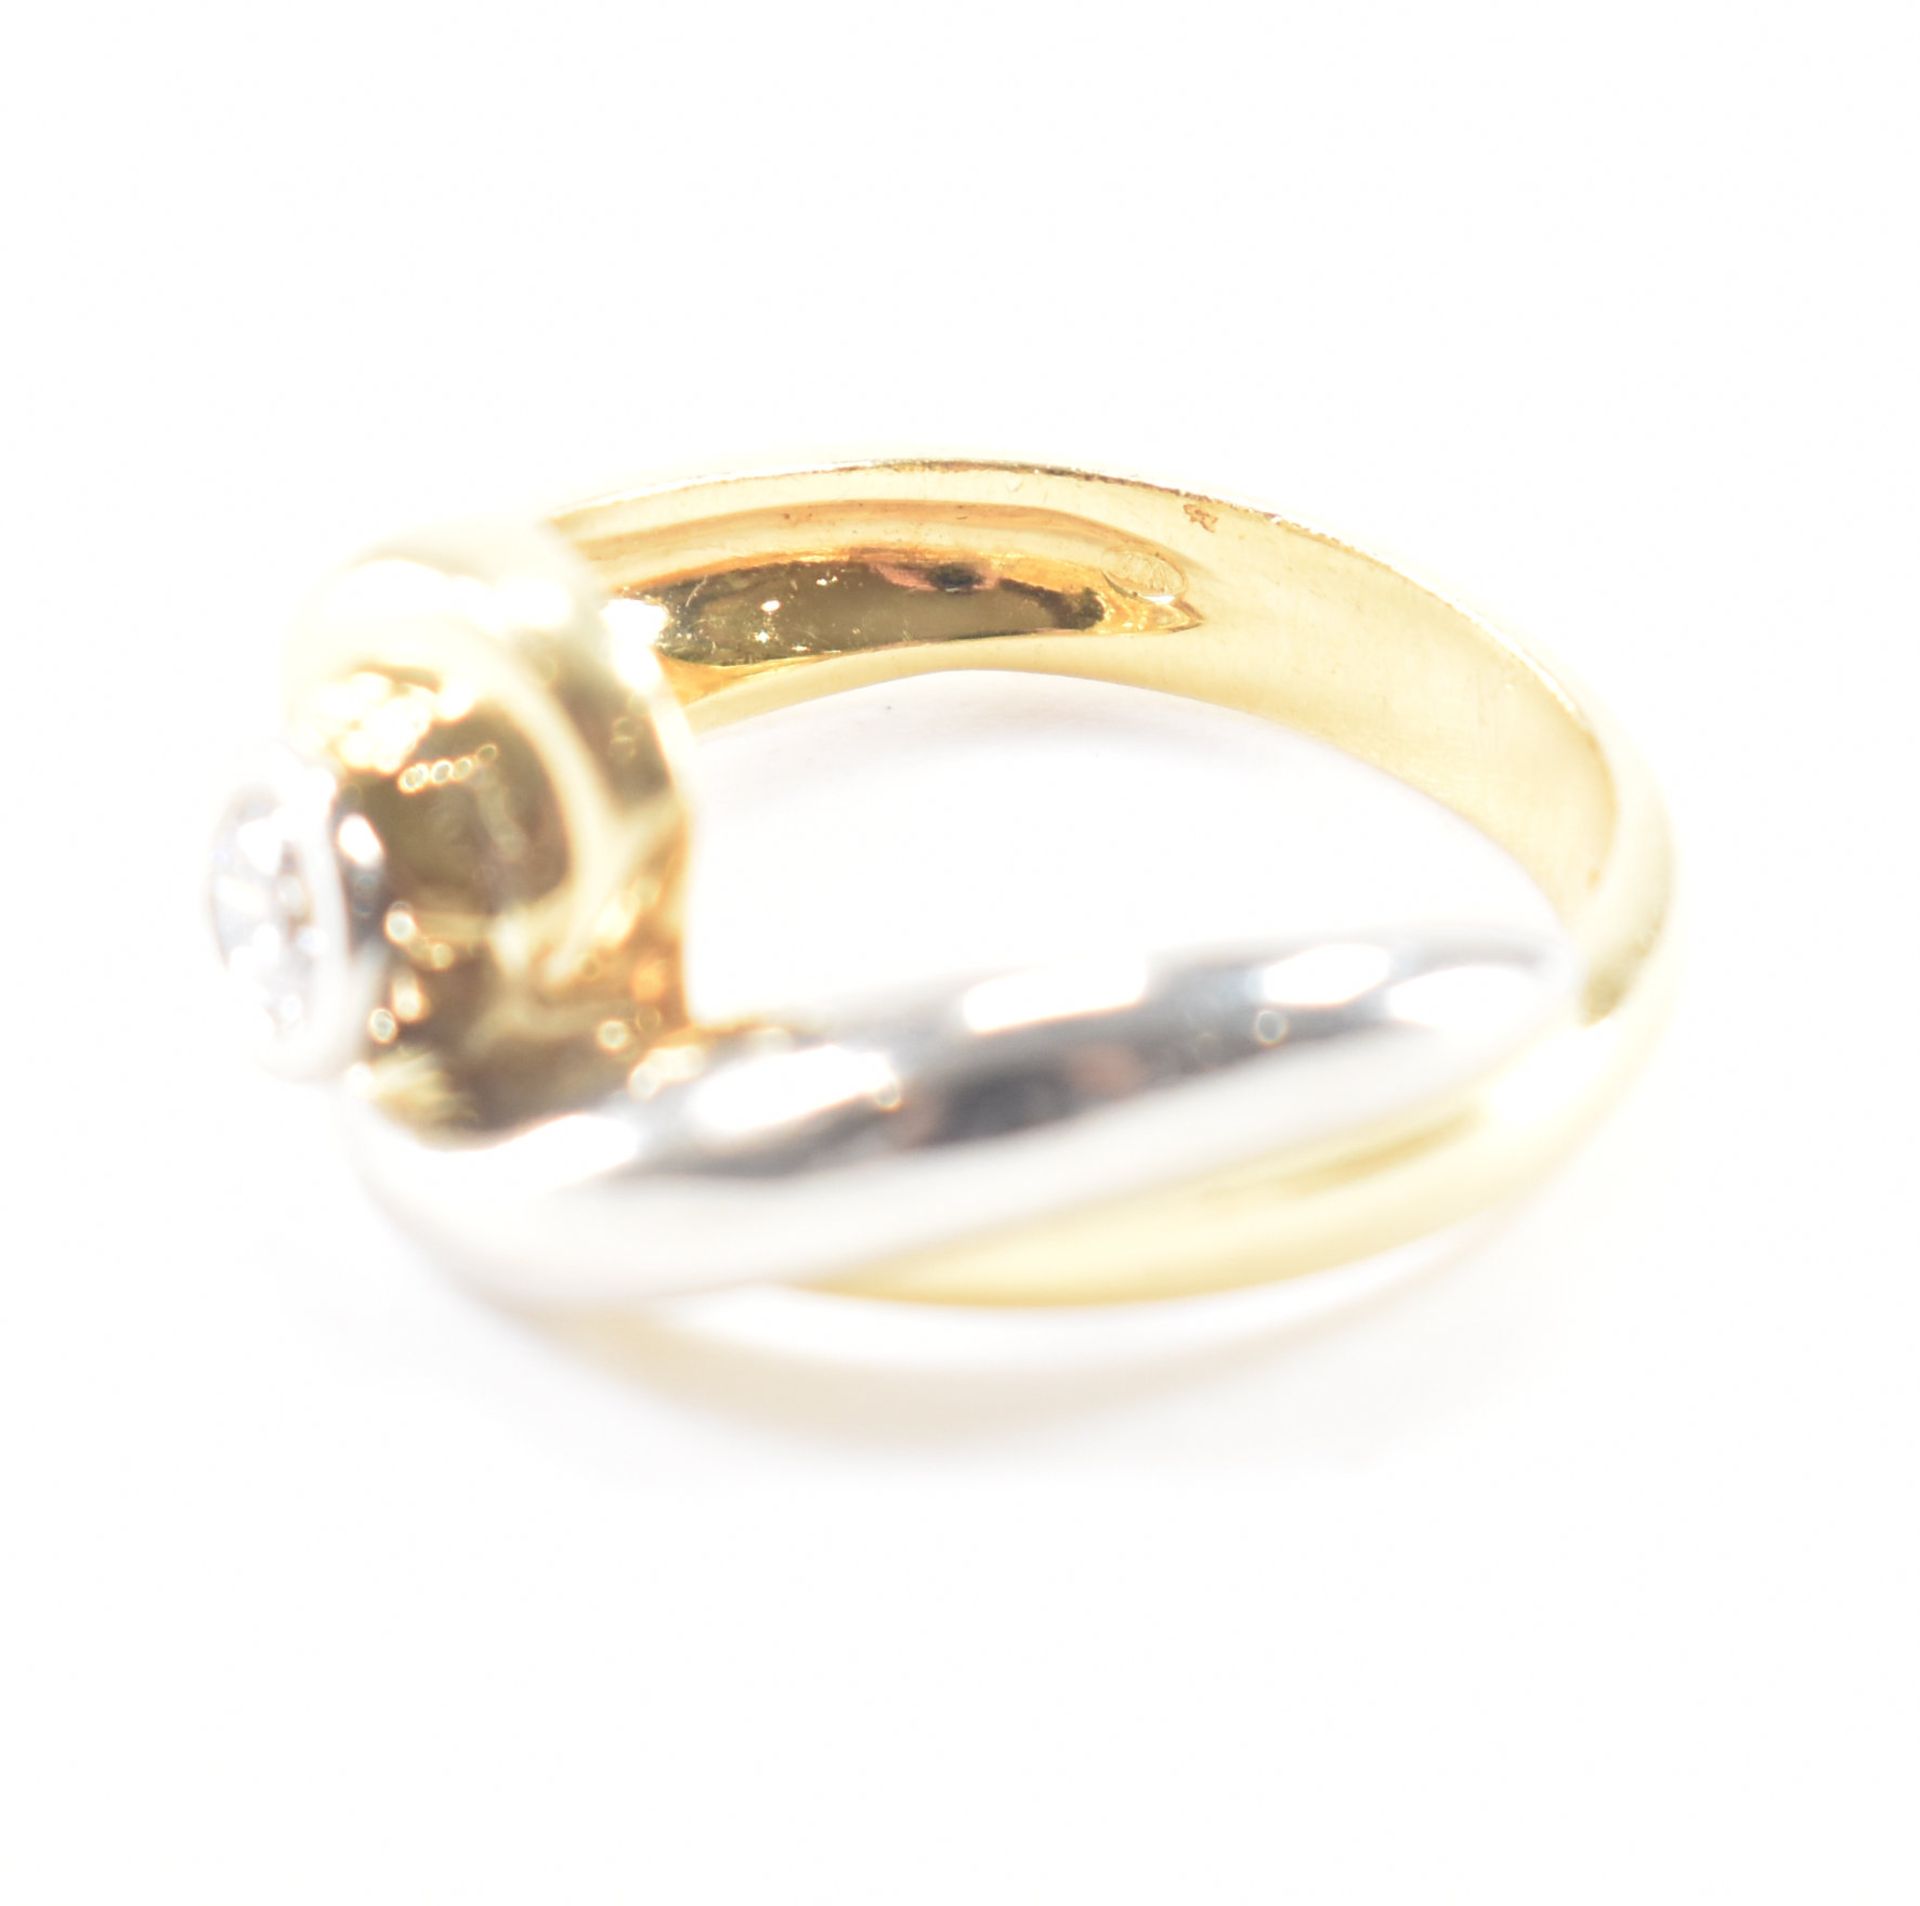 18CT BICOLOUR GOLD & DIAMOND SOLITAIRE RING - Image 8 of 9